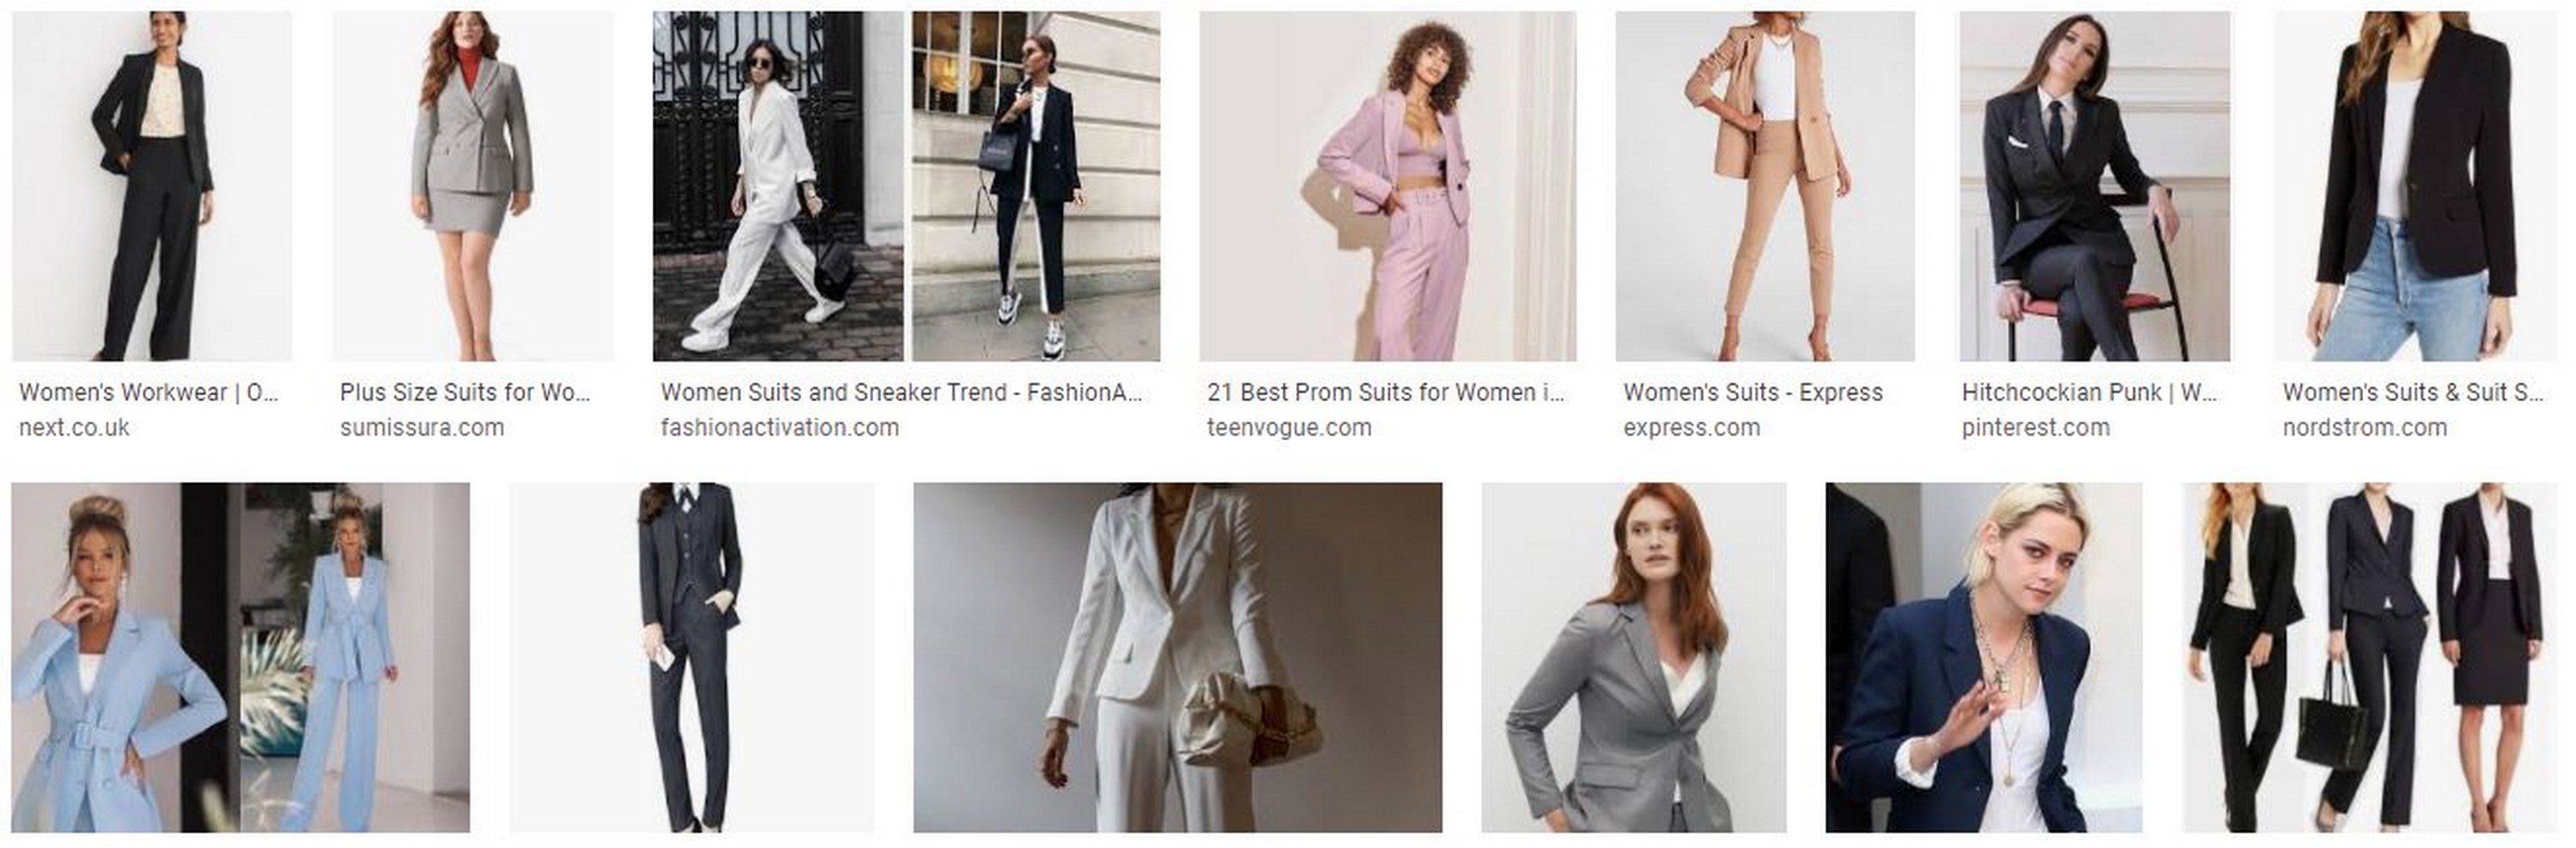 Women Suits and Sneaker Trend - FashionActivation